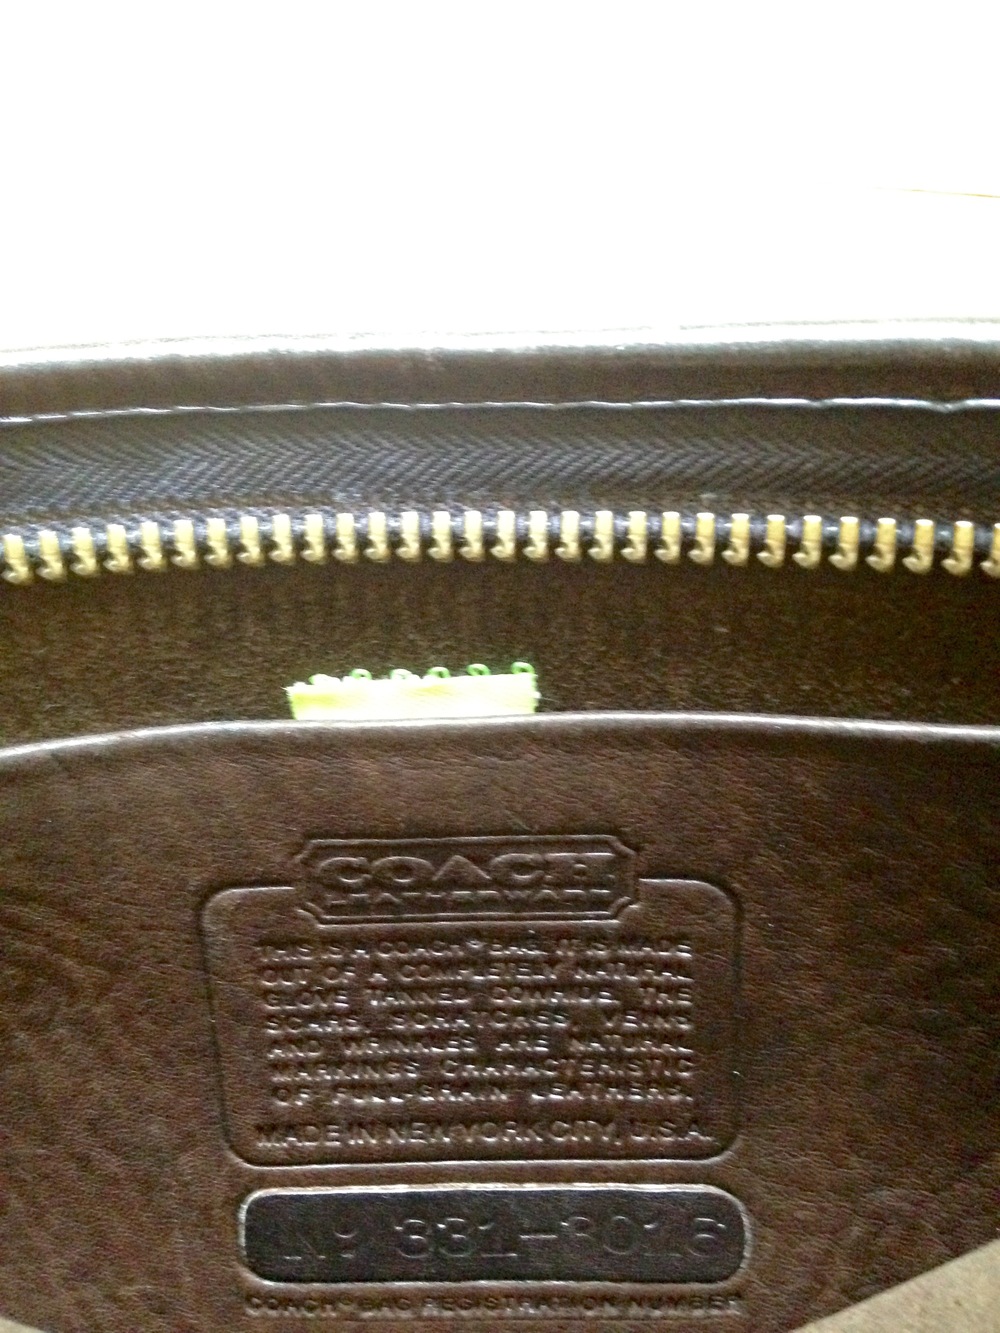 vintage dark brown leather genuine coach bag $125 - bags and purses -  bright lights big pretty